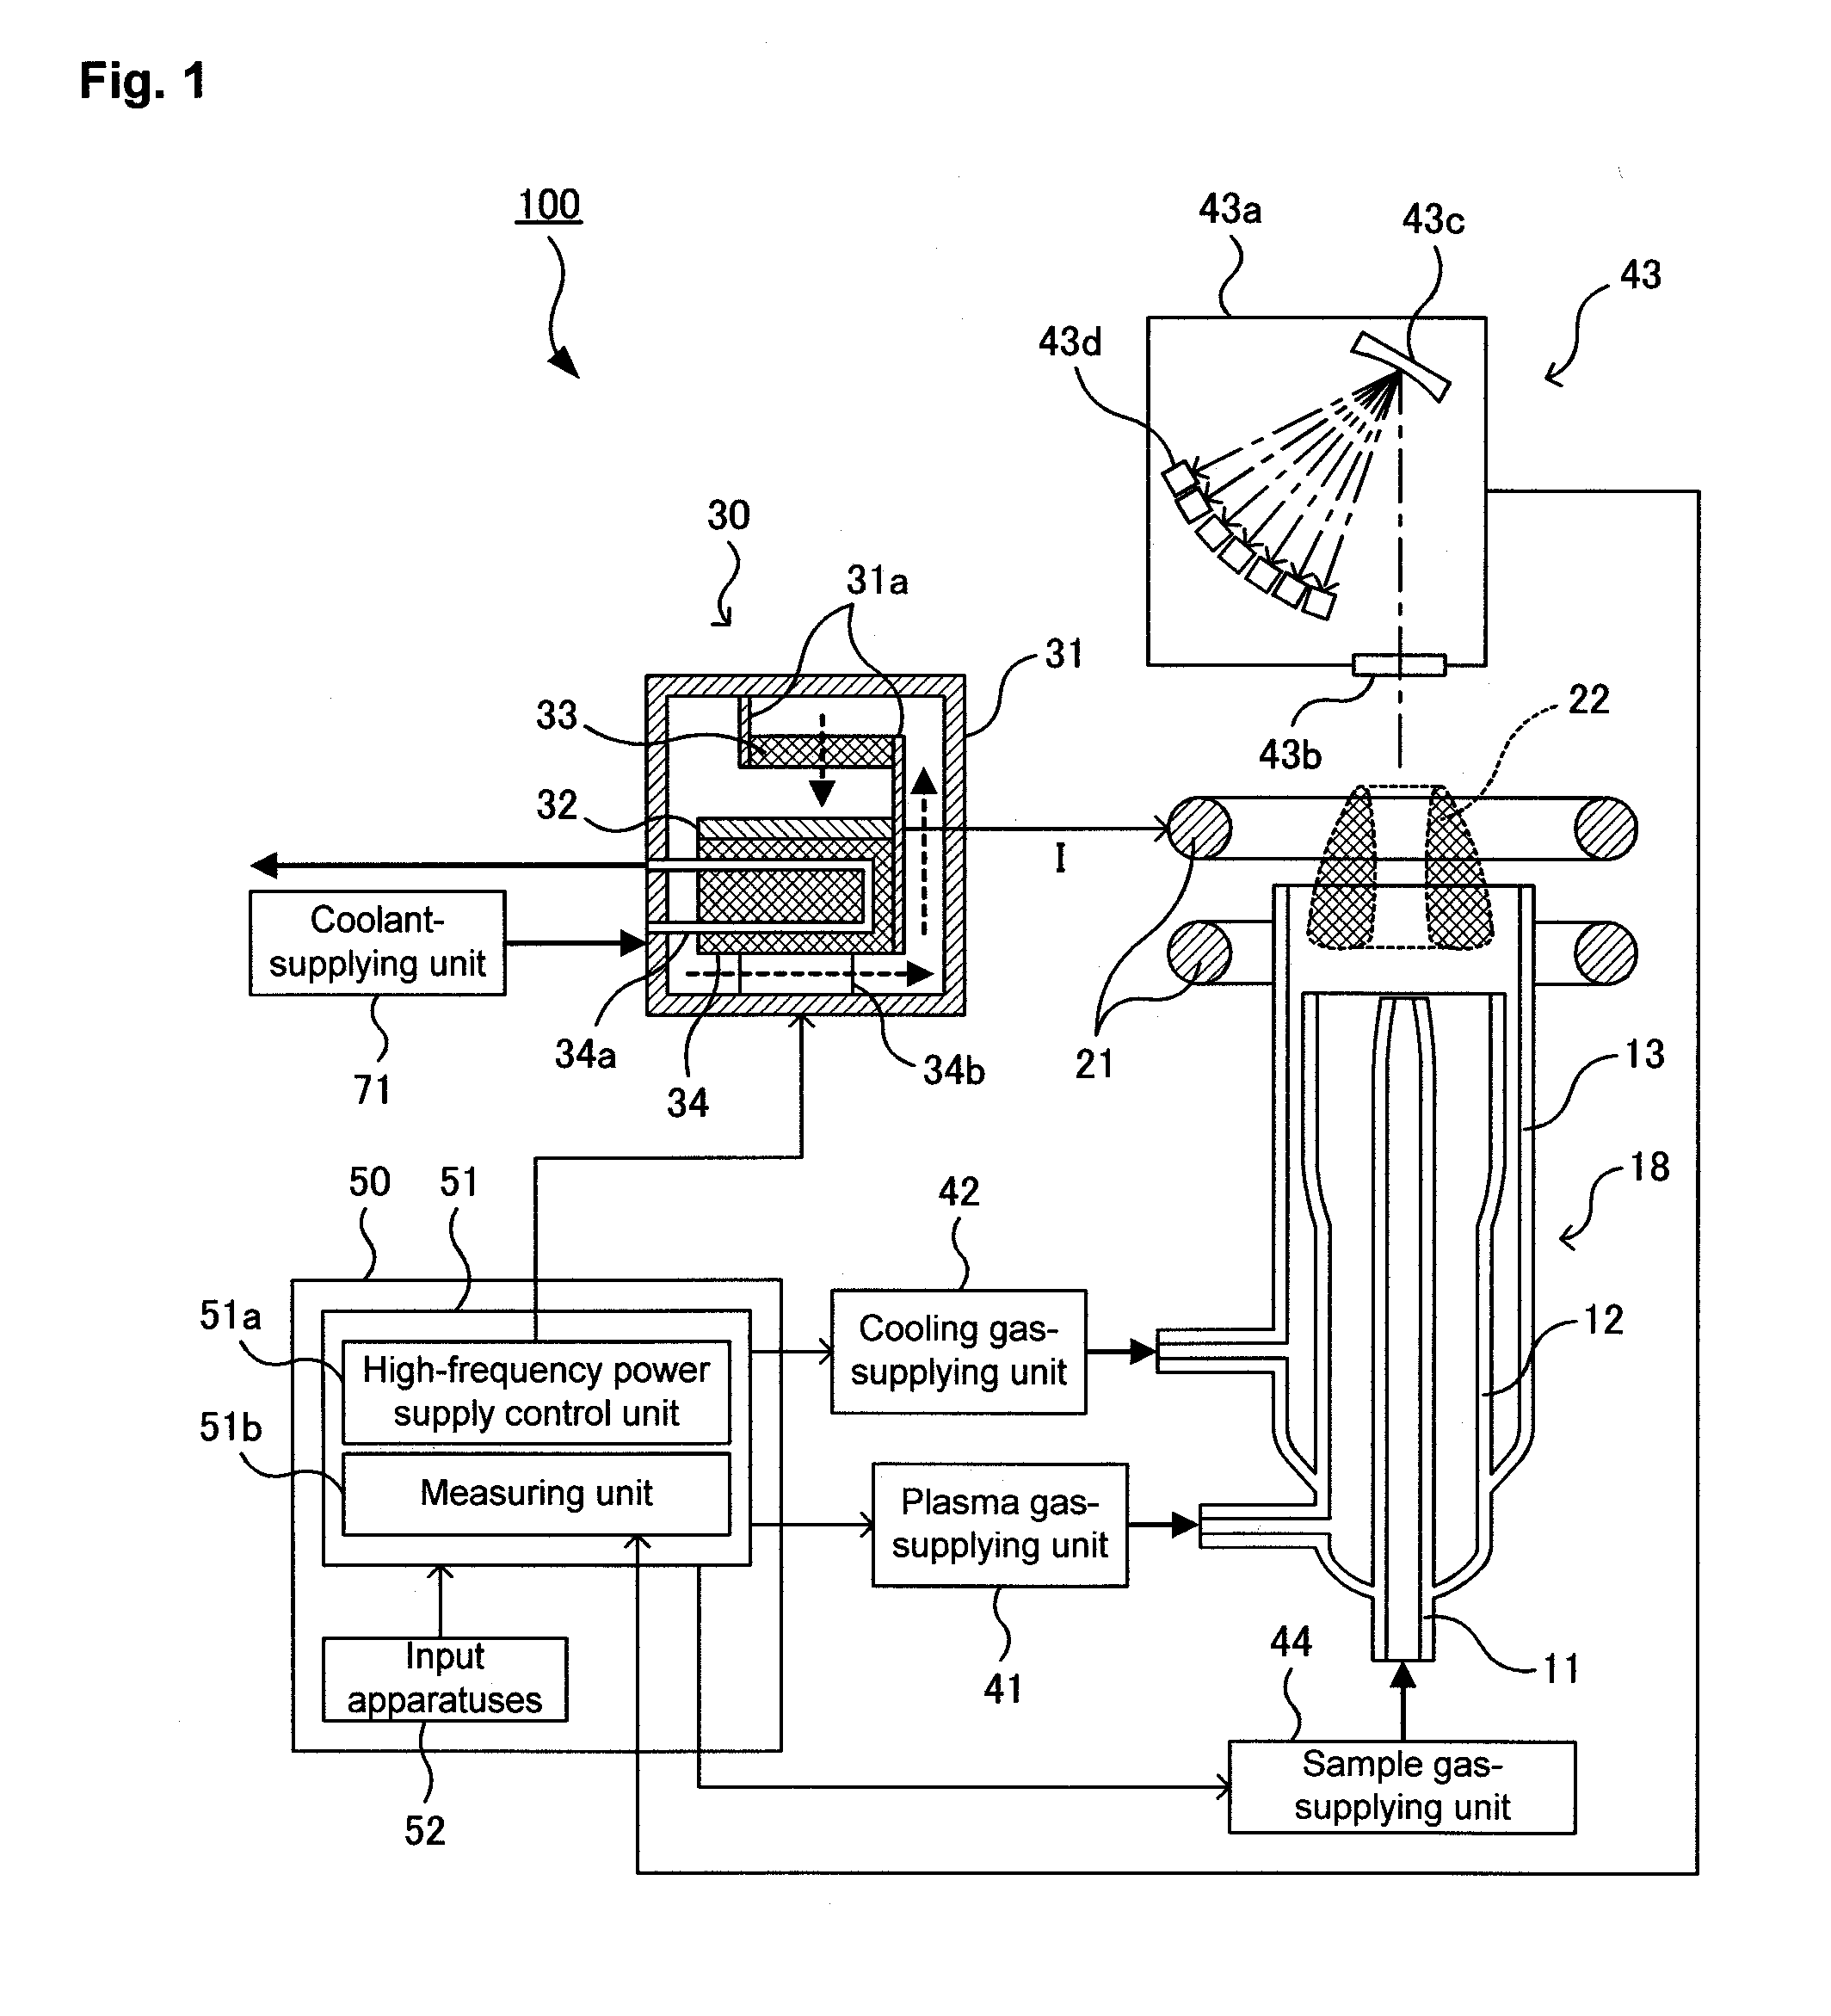 High-frequency power supply for plasma and icp optical emission spectrometer using the same